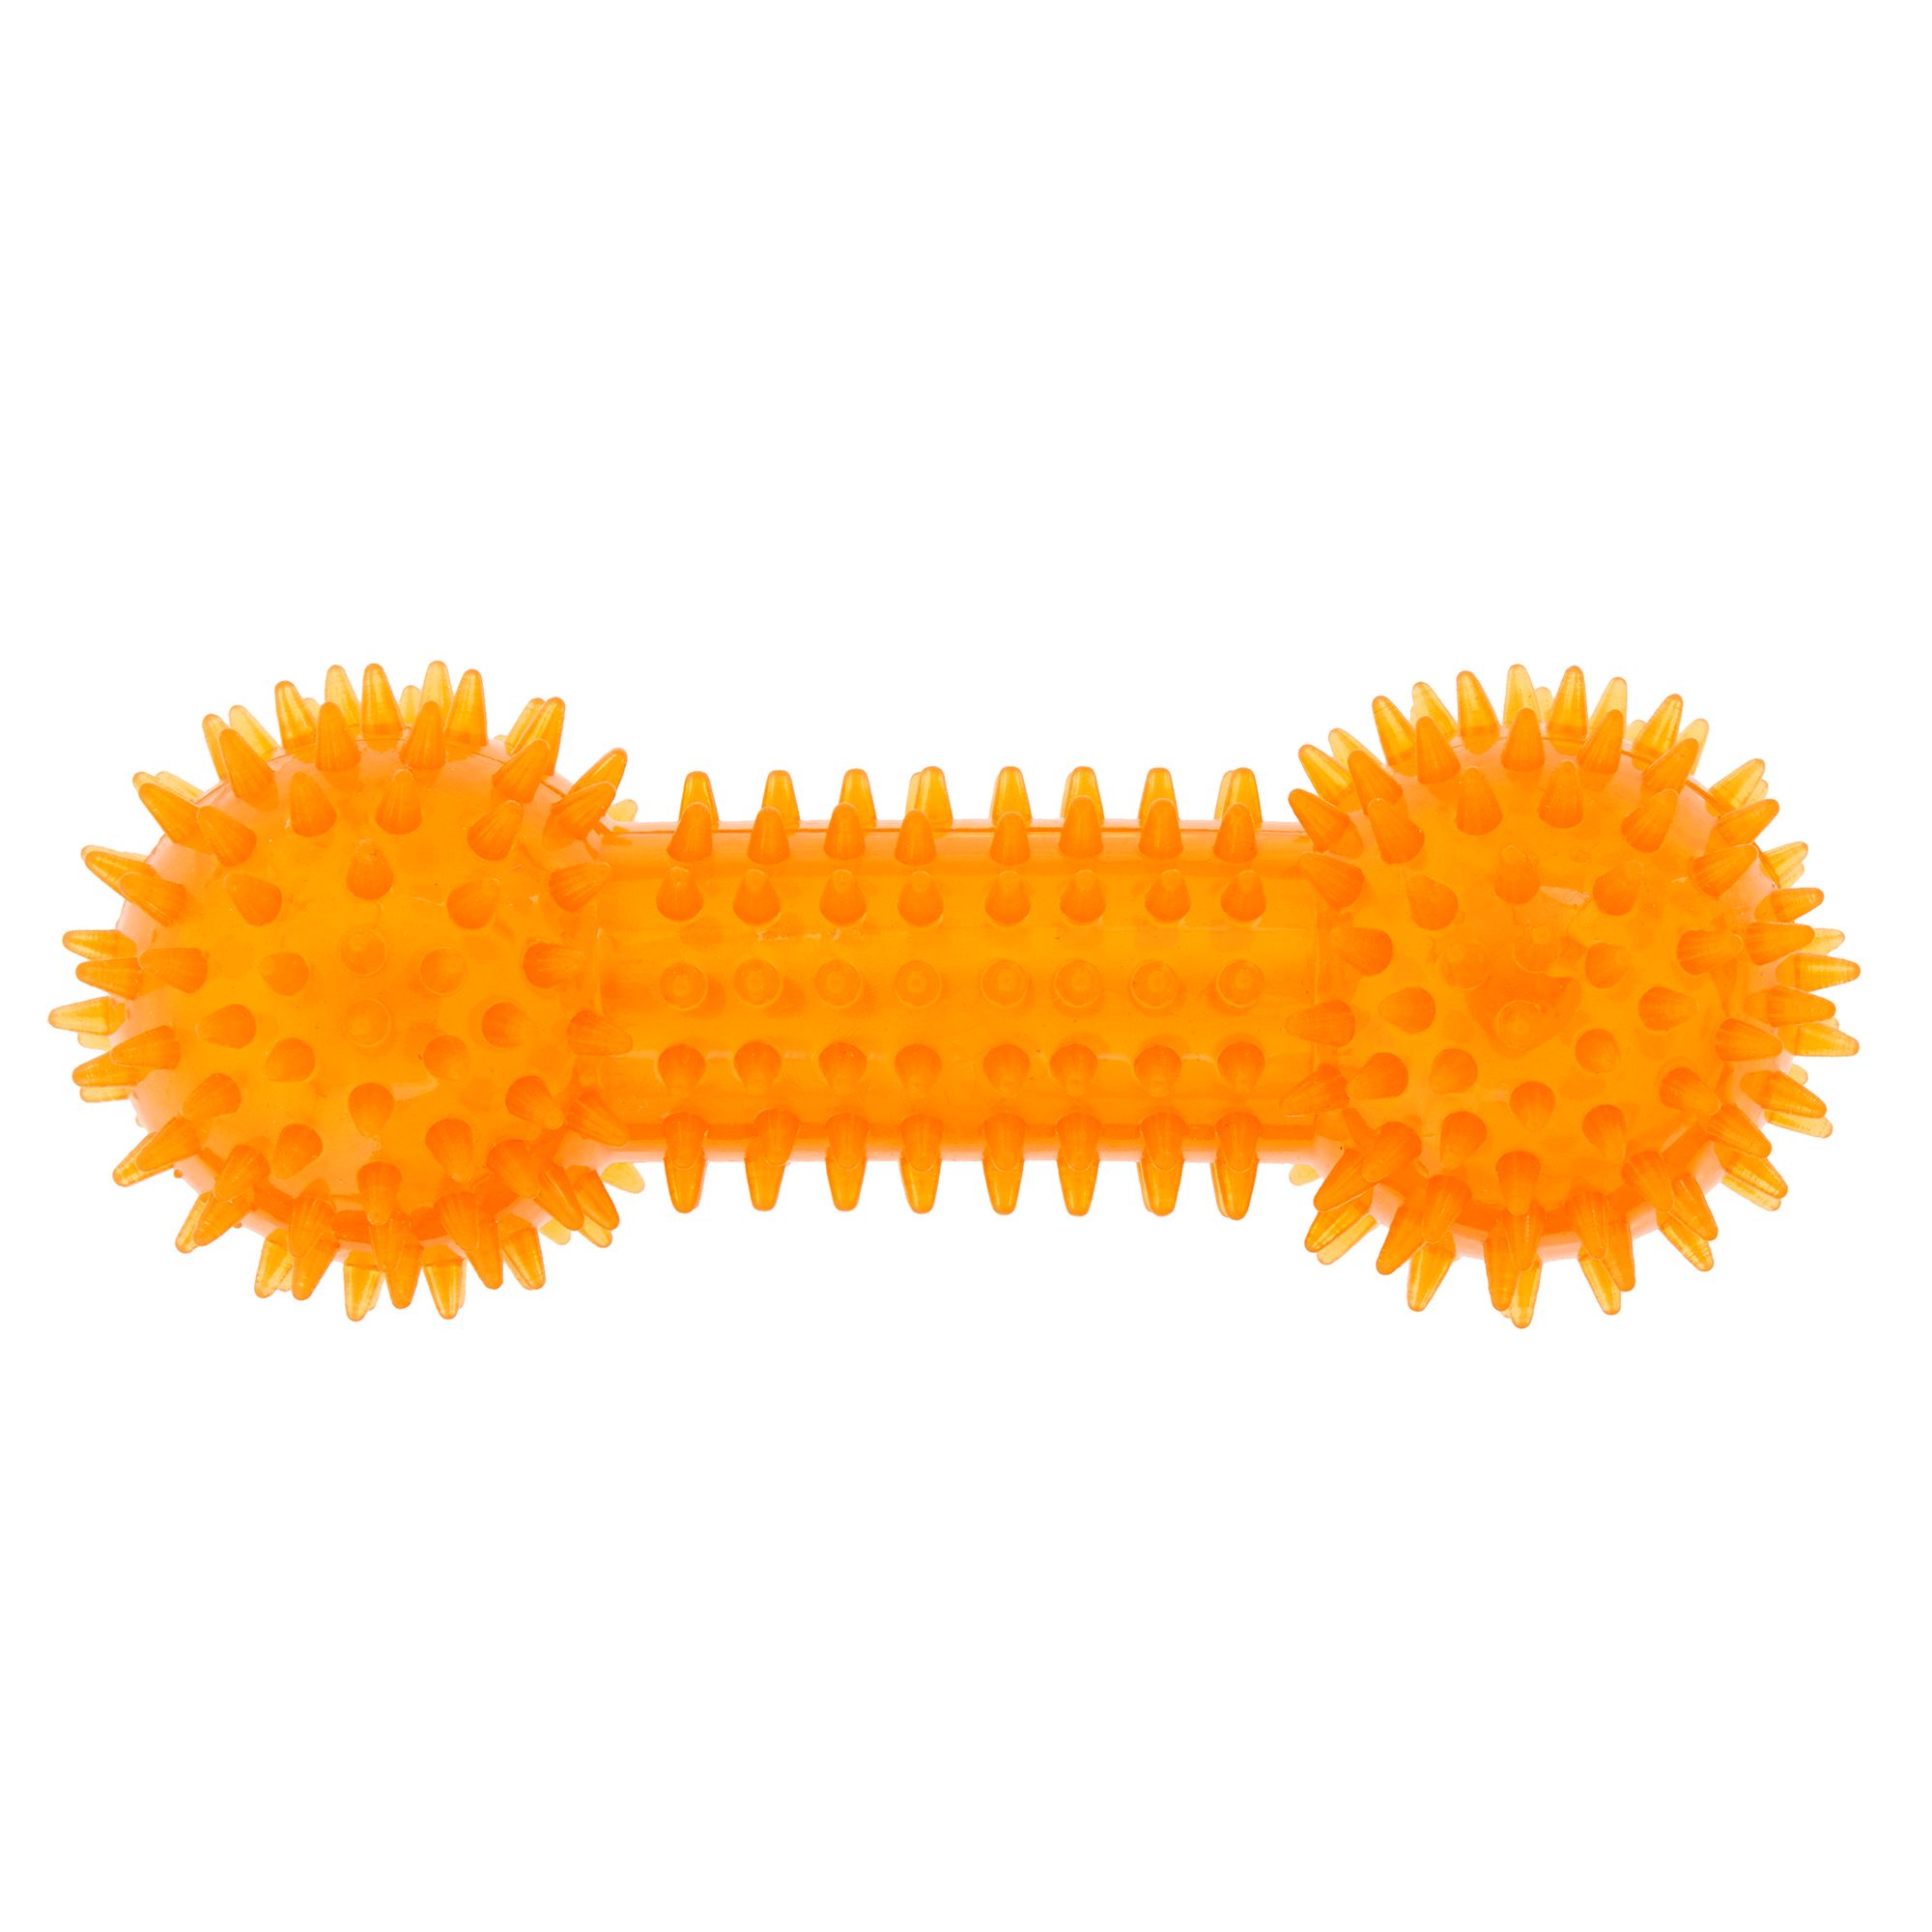 spiky ball for dogs